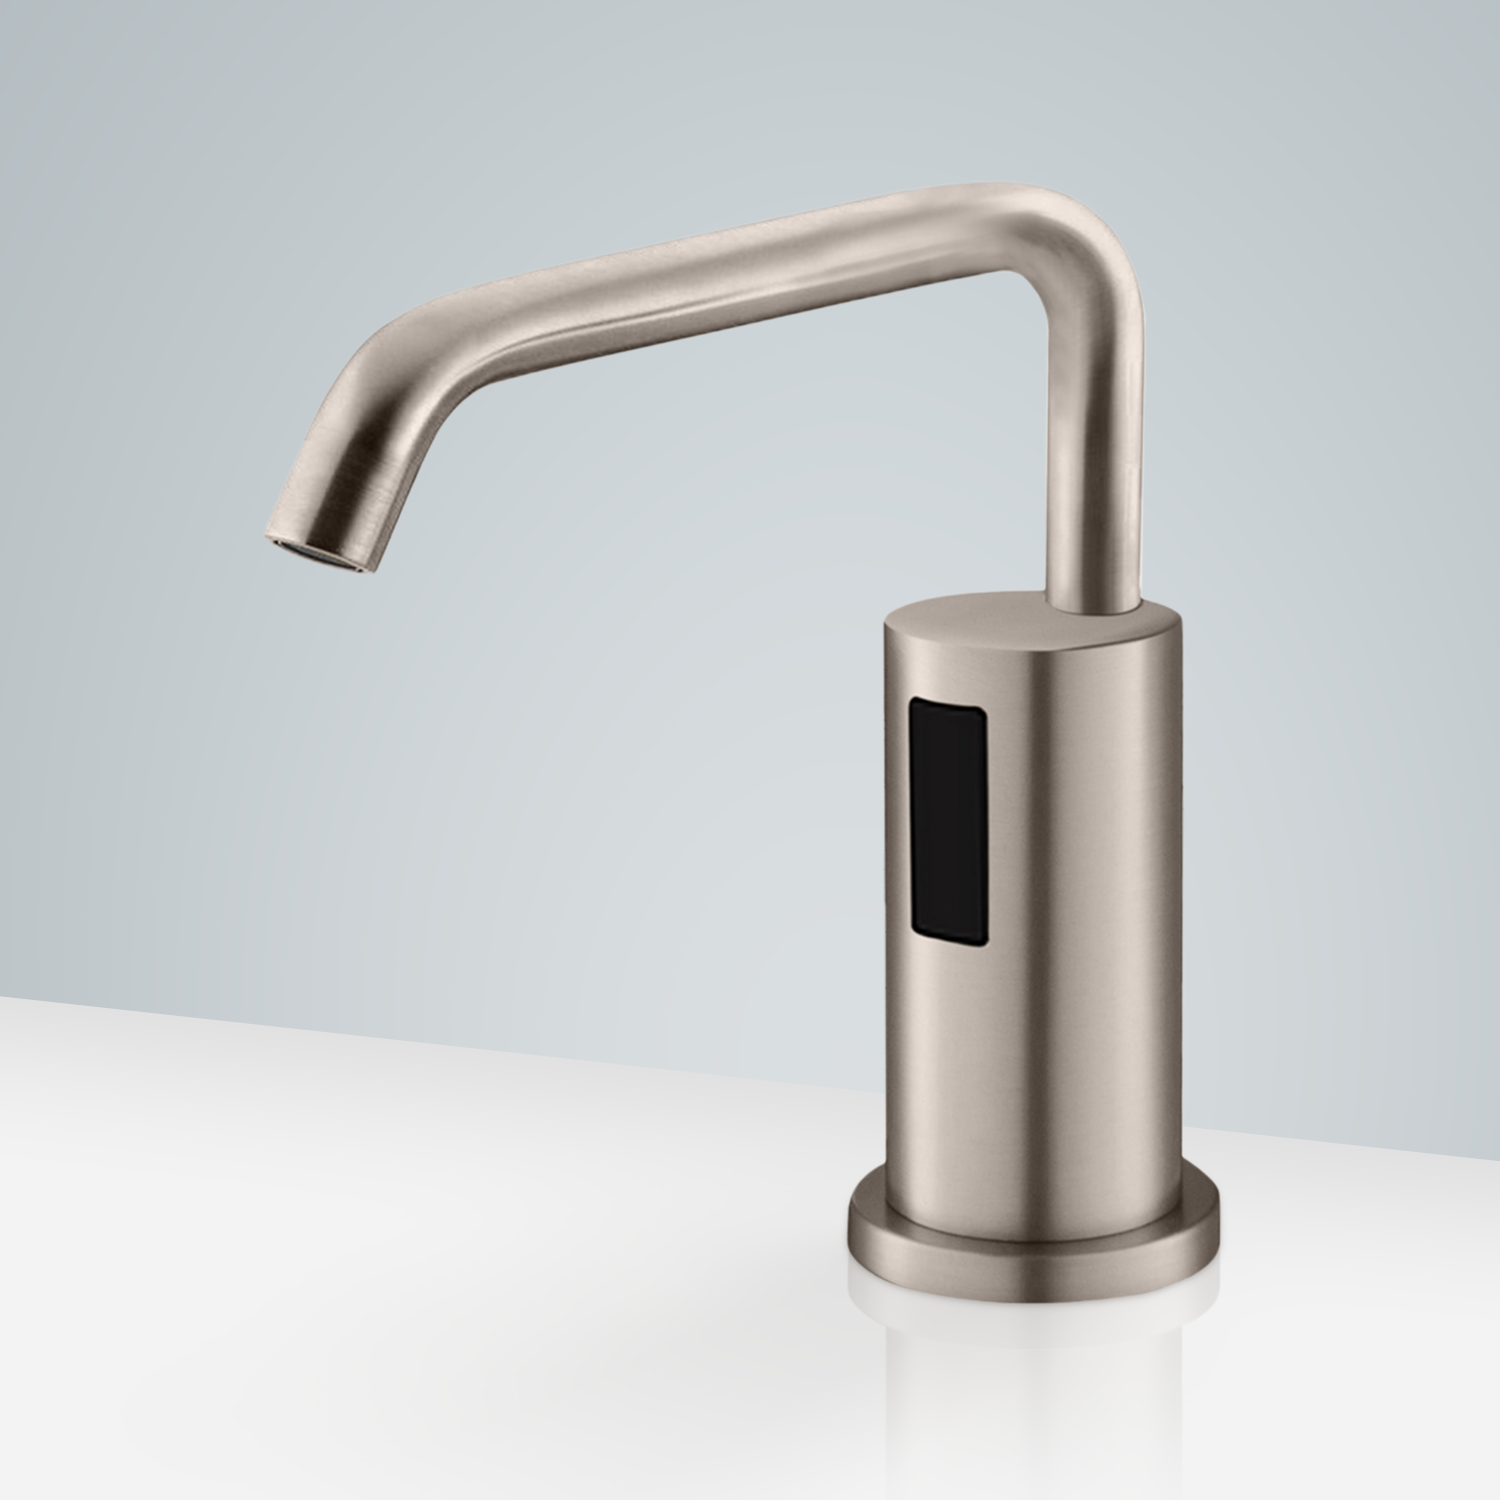 Fontana Brushed Nickel Automatic Sensor Deck Mounted Commercial Liquid Foam Soap Dispenser - Durable made Ideal for Commercial Applications